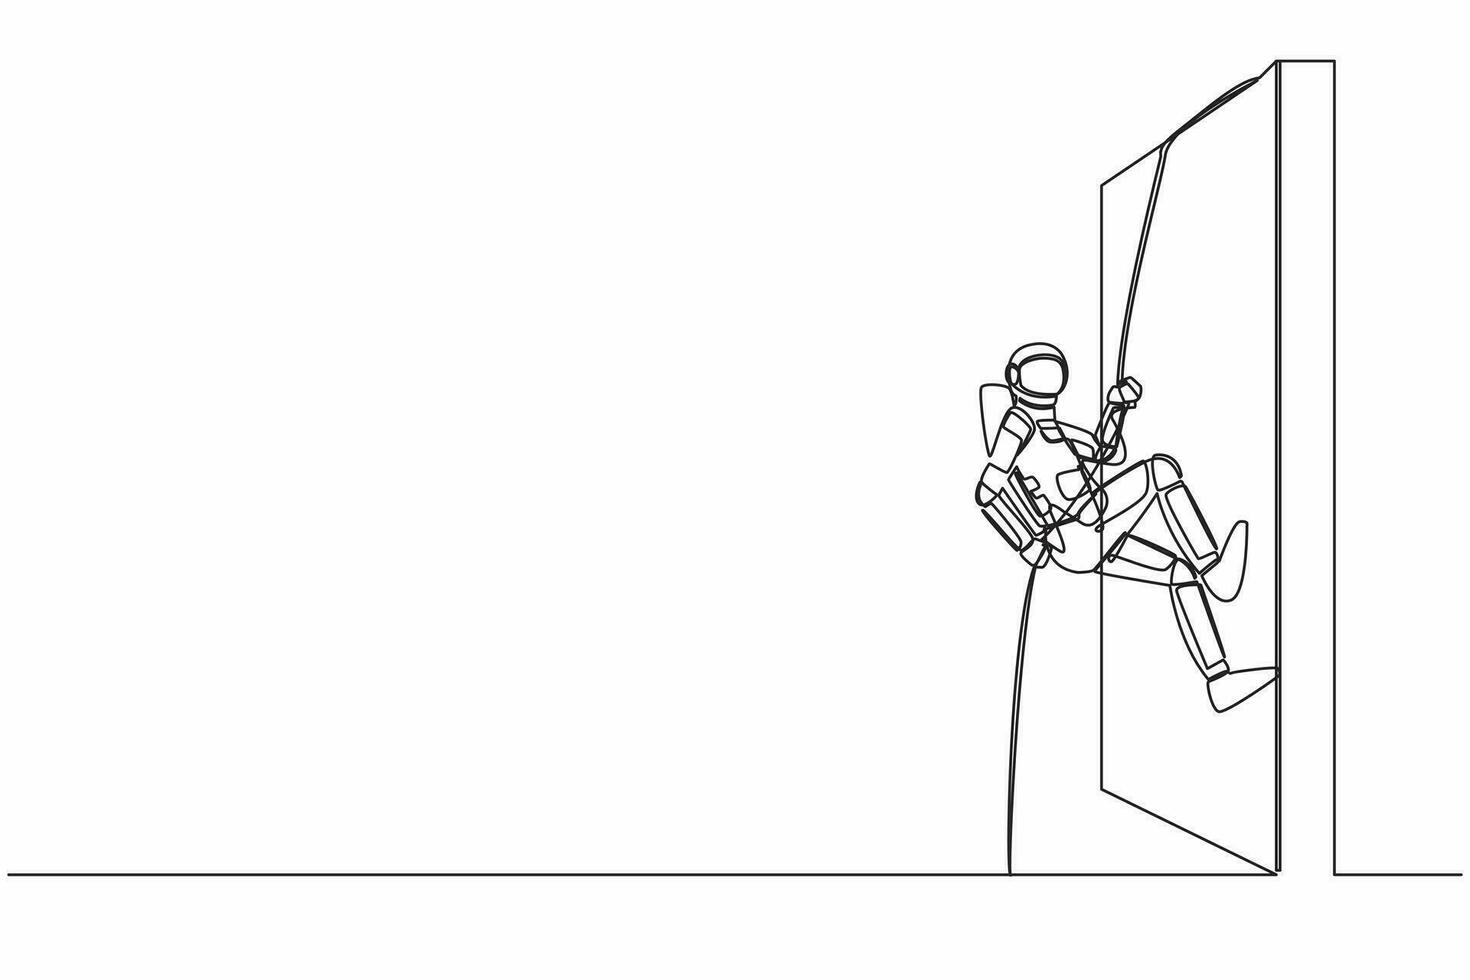 Continuous one line drawing young astronaut climbing over wall with rope in moon surface. Challenge in spaceship expedition. Cosmonaut outer space. Single line draw graphic design vector illustration